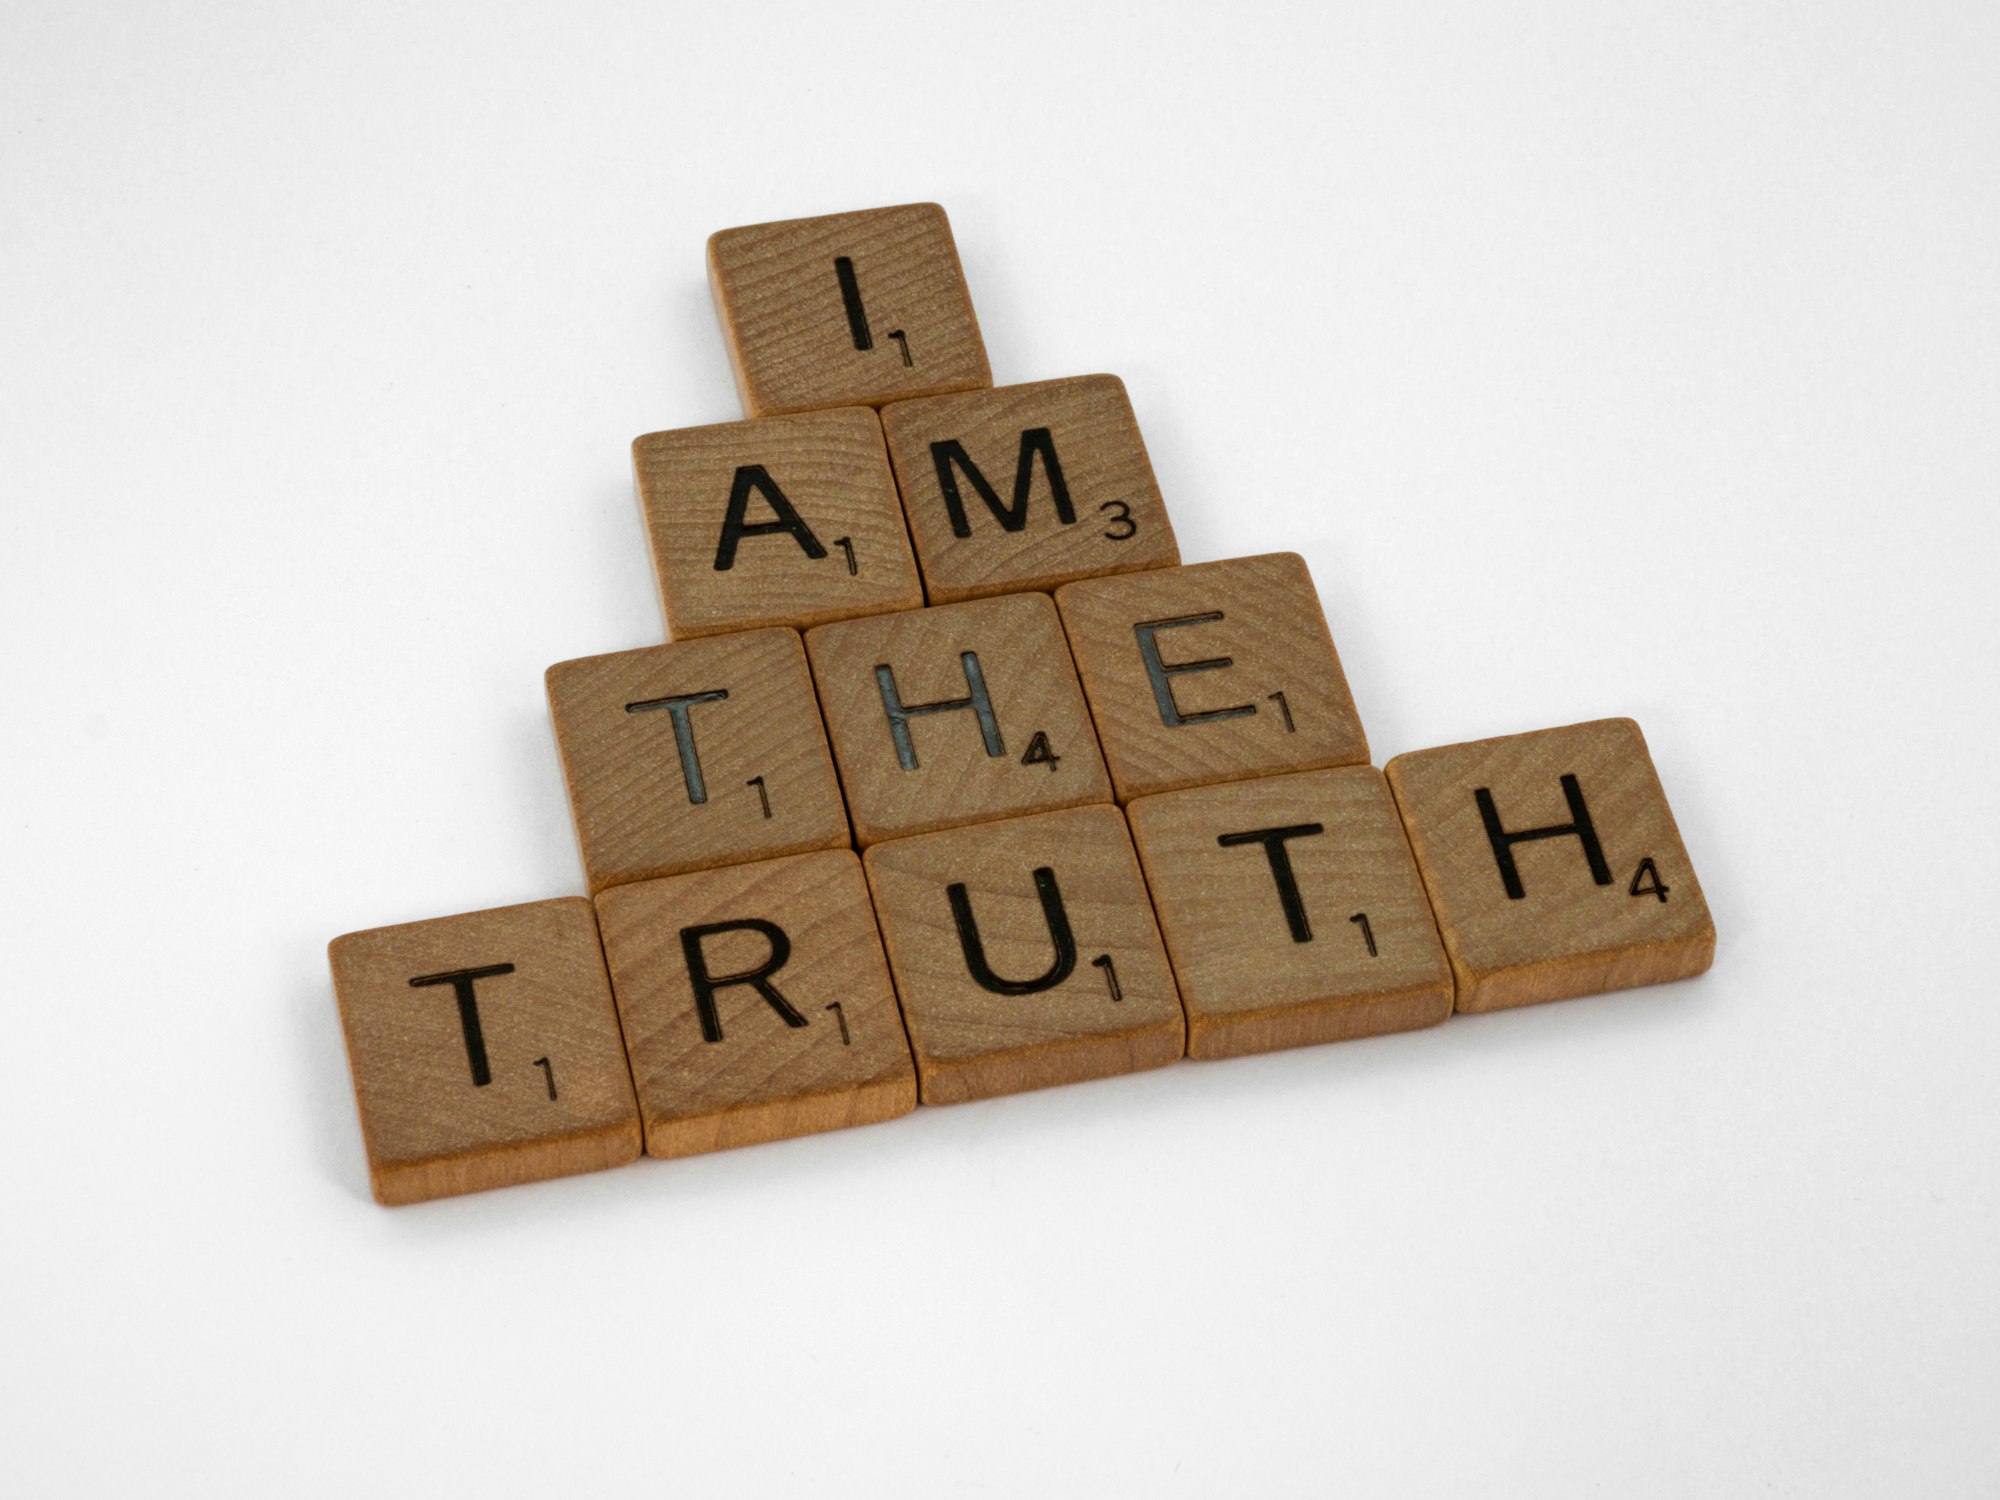 Thoughts on sources of truth